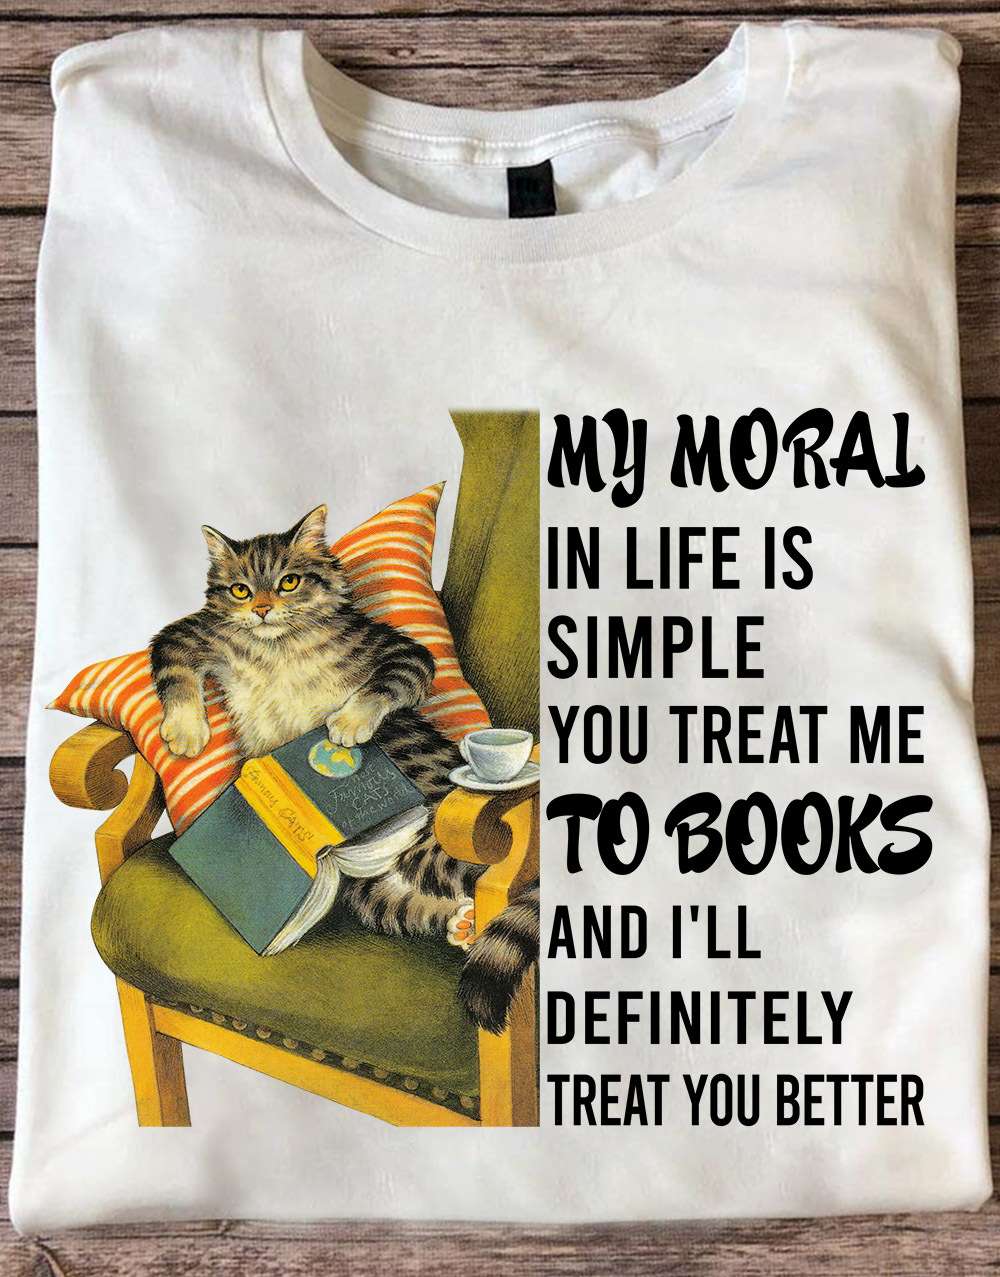 My moral in life is simple you treat me to books and i'll definitely treat you better - Cat Love Book